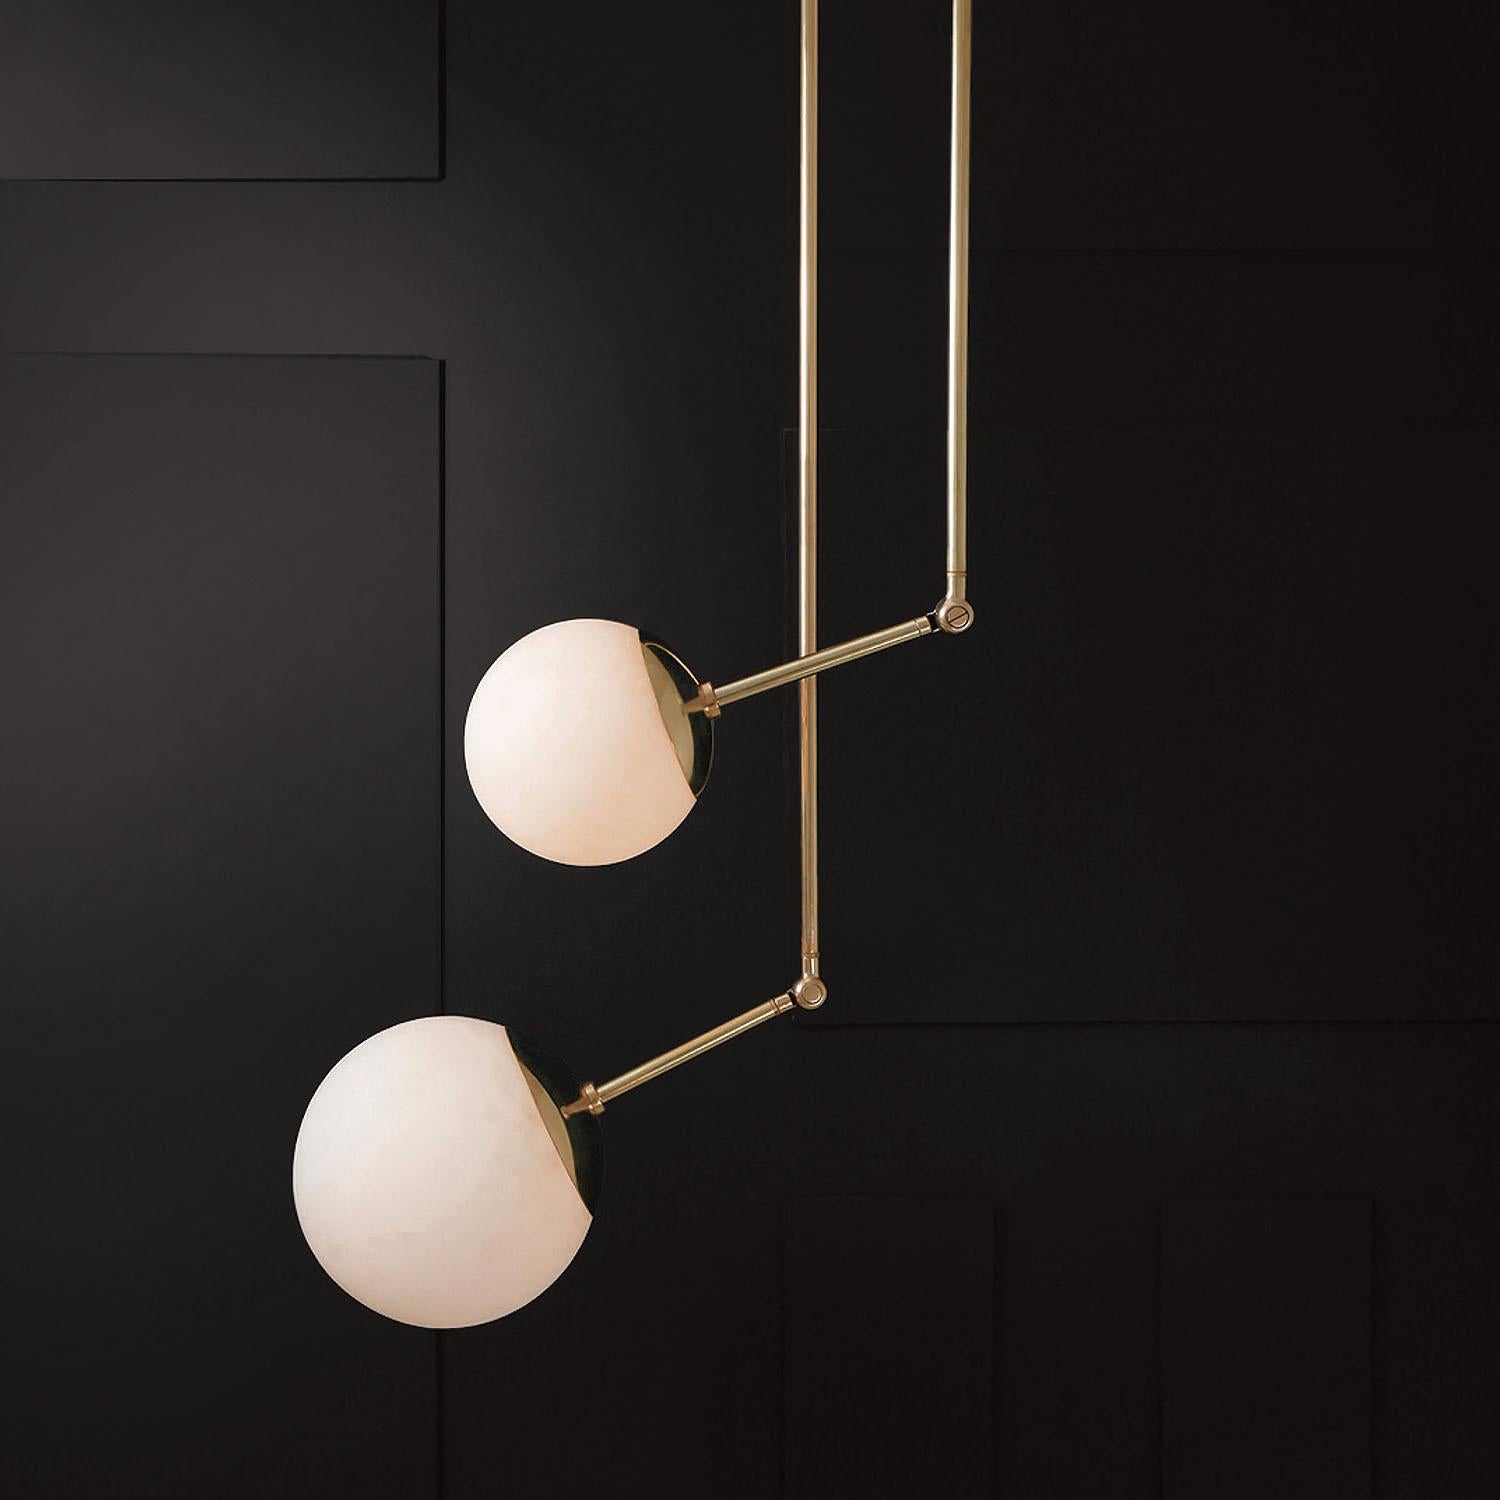 Contemporary Sculpted Brass & Glass Pendant, Tango Two Globe by Paul Matter

Tango is born from playful experimentation with vintage lighting components.
Burnt, aged brass and etched glass are combined to create lighting fixtures that fuse